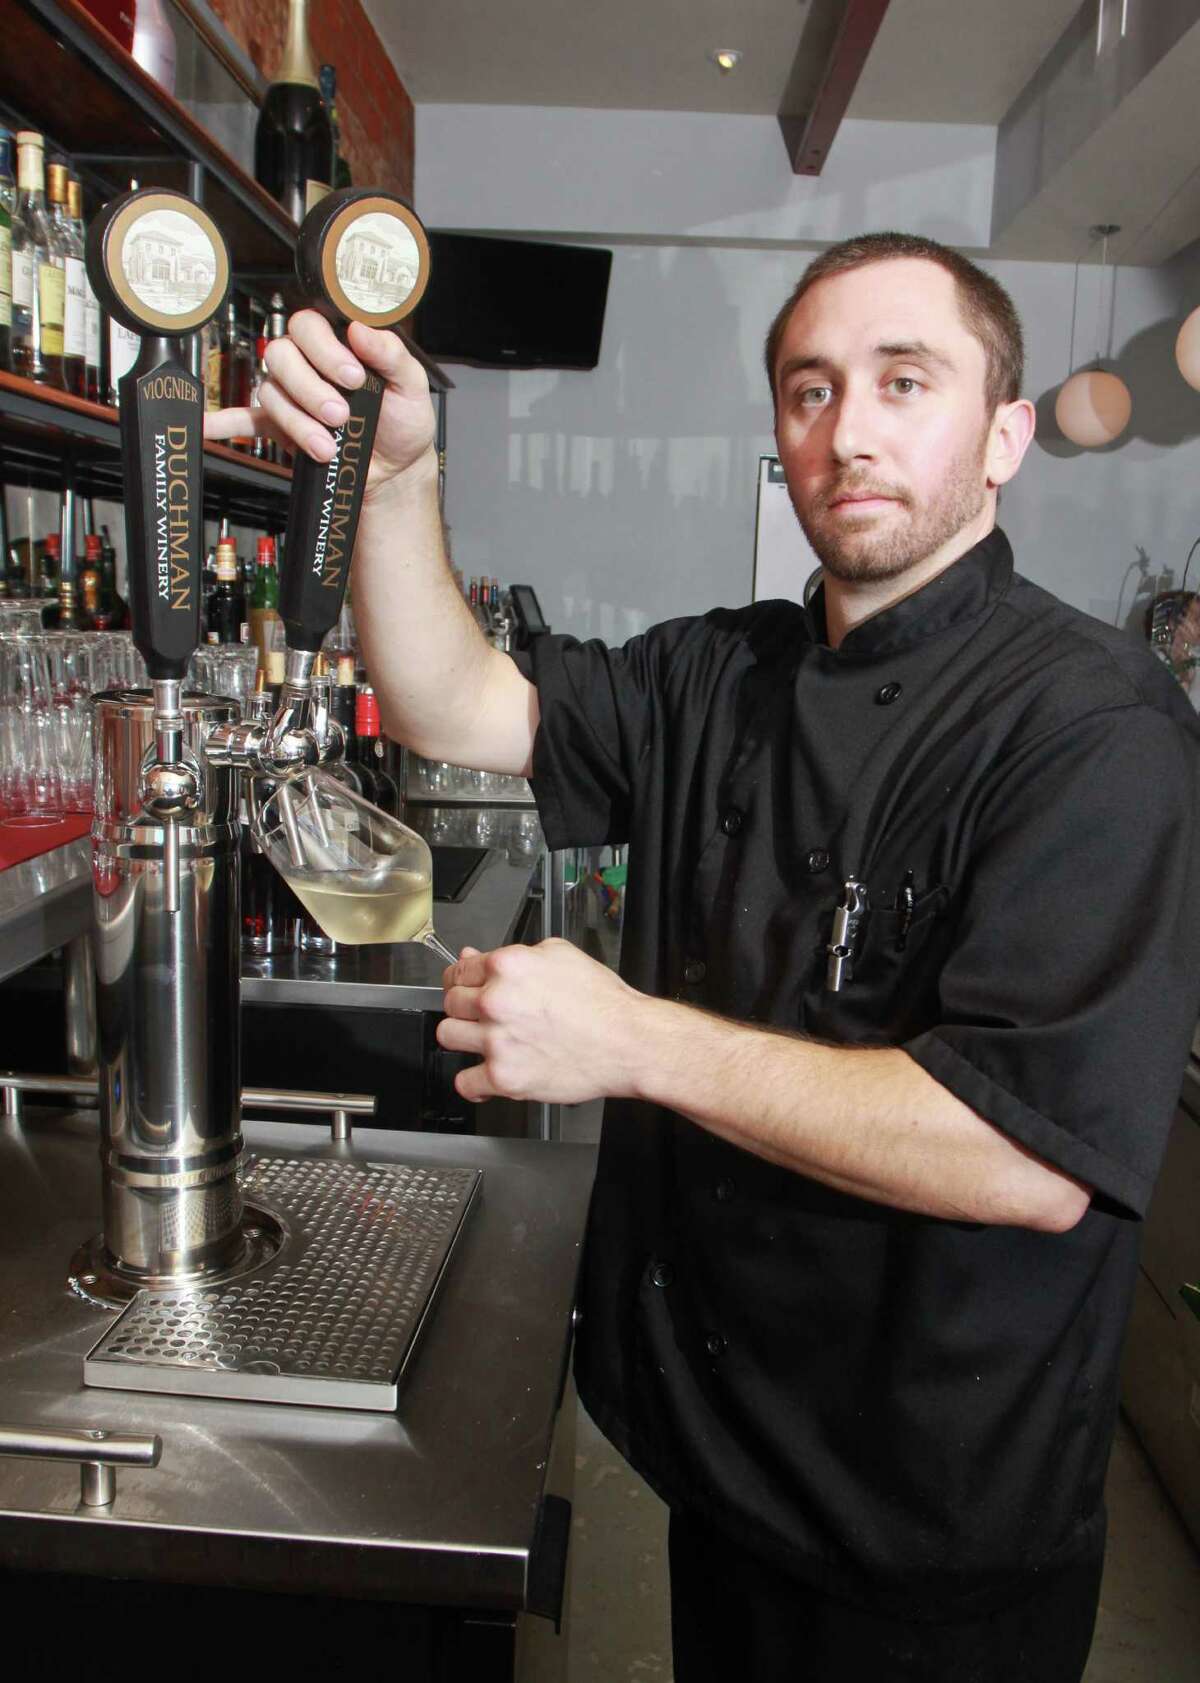 (For the ChronicleGary Fountain, July 24, 2012) Stefan Breitweiser using a tap for a glass of Duchman Bermantino wine at L'Olivier Restaurant & Bar.